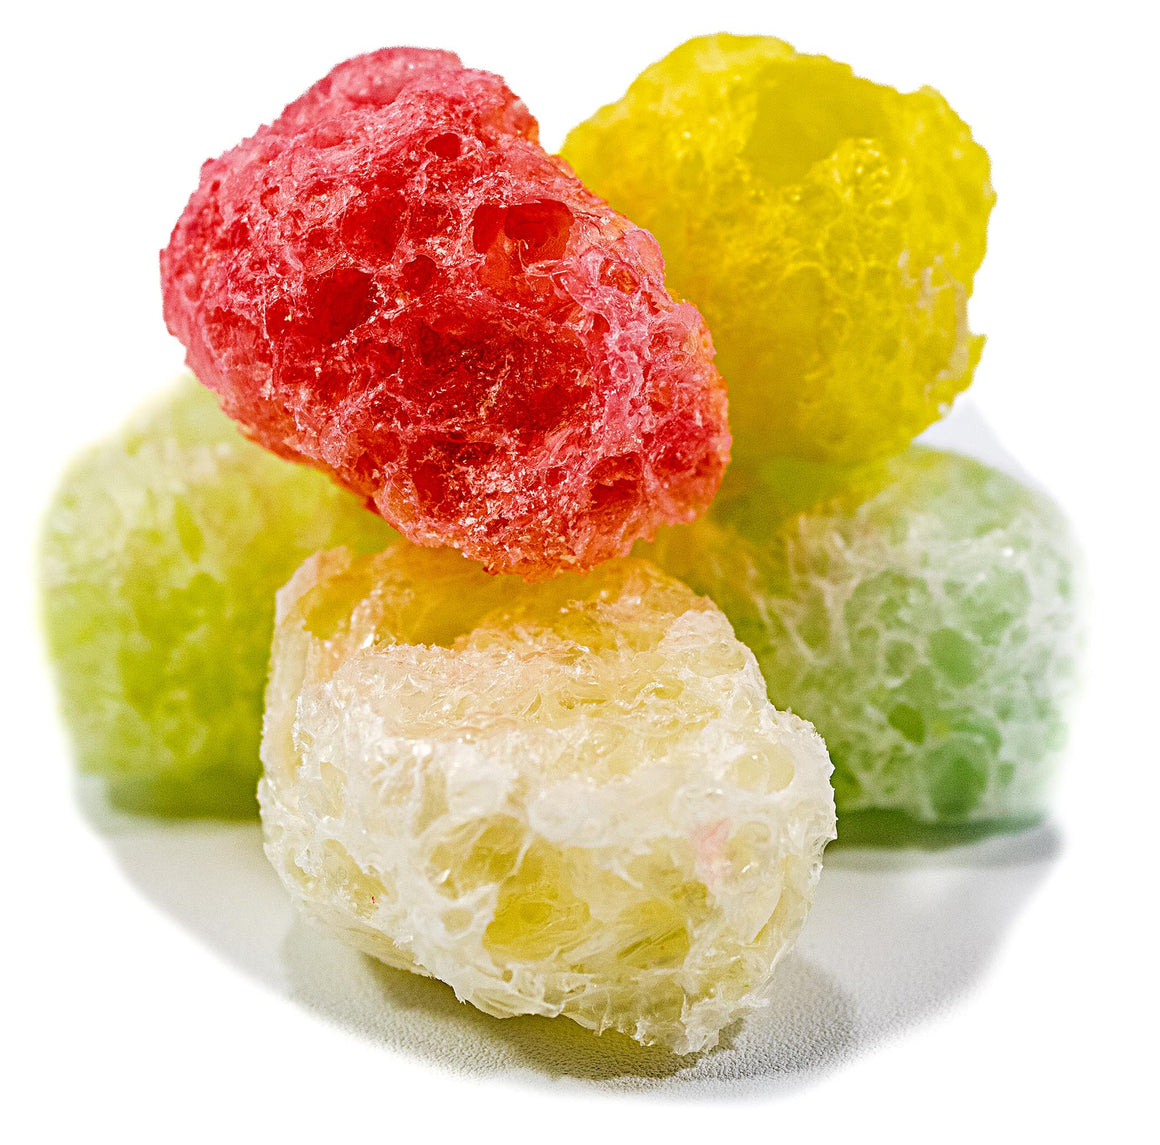 Frizzlies Freeze-Dried 12 Flavor Gummi Bears 1.8 oz Bag - For fresh candy and great service, visit www.allcitycandy.com